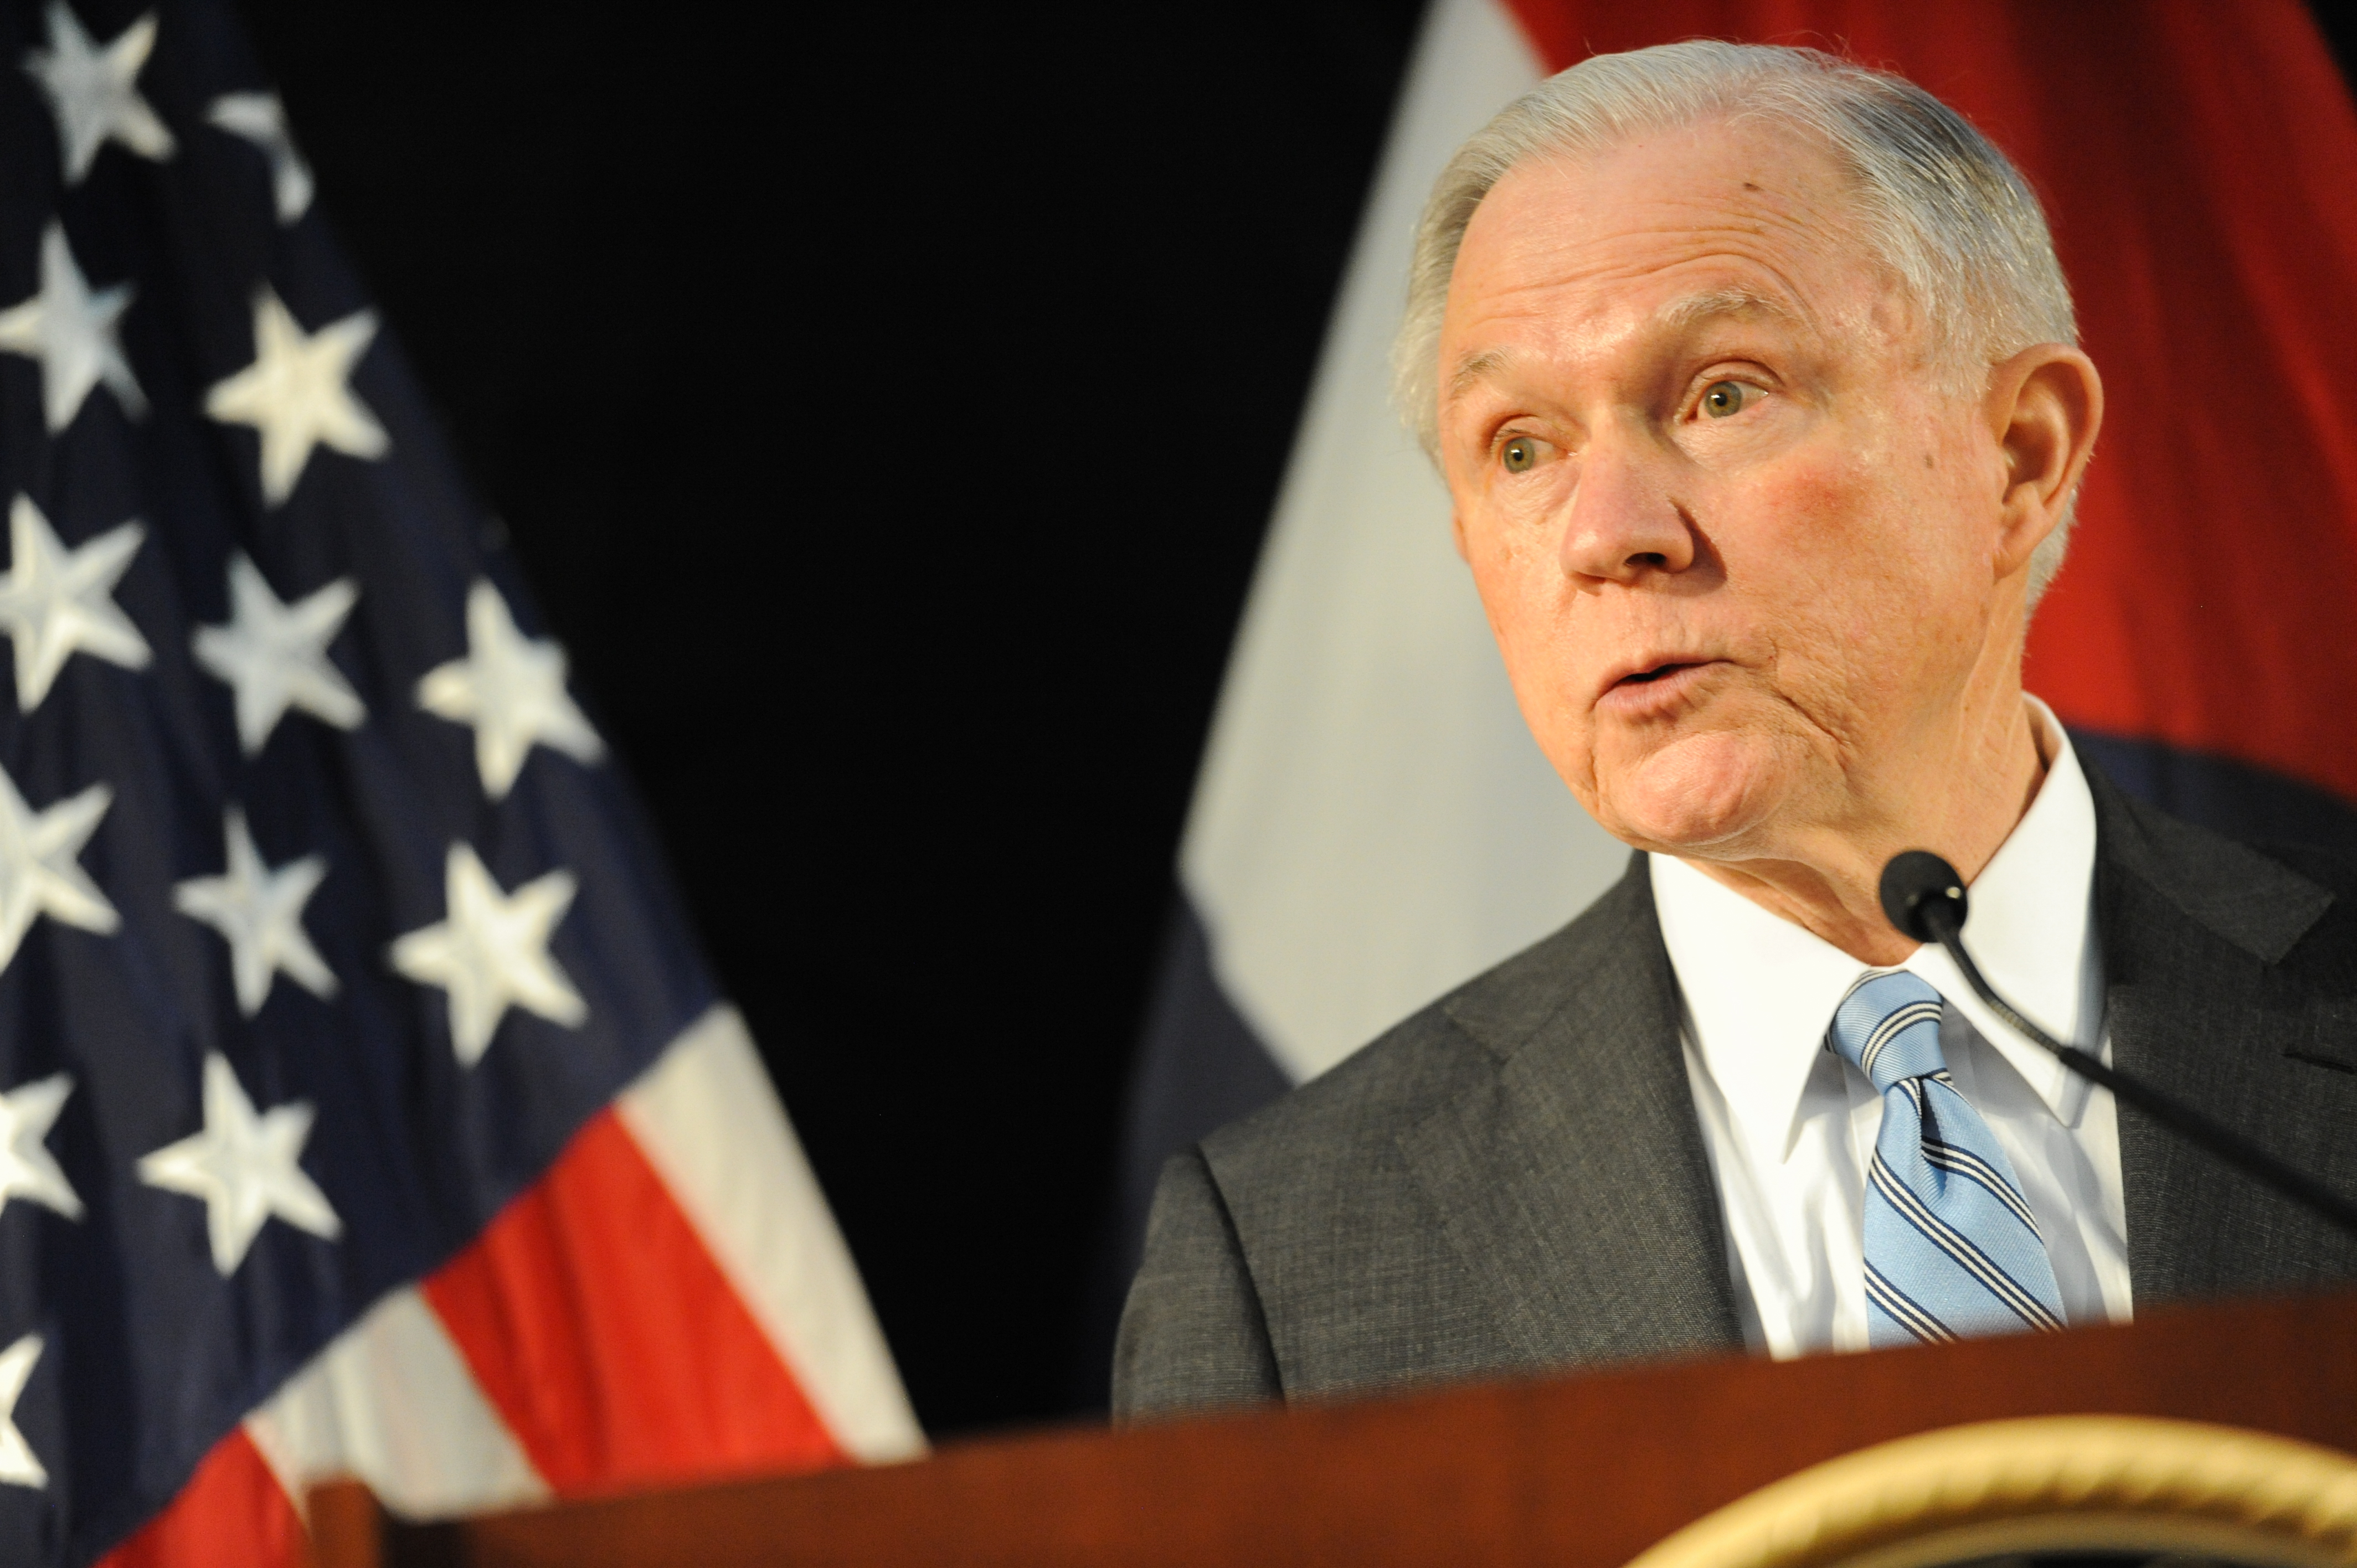 Jeff Sessions Addresses Law Enforcement In St. Louis About Combatting Crime